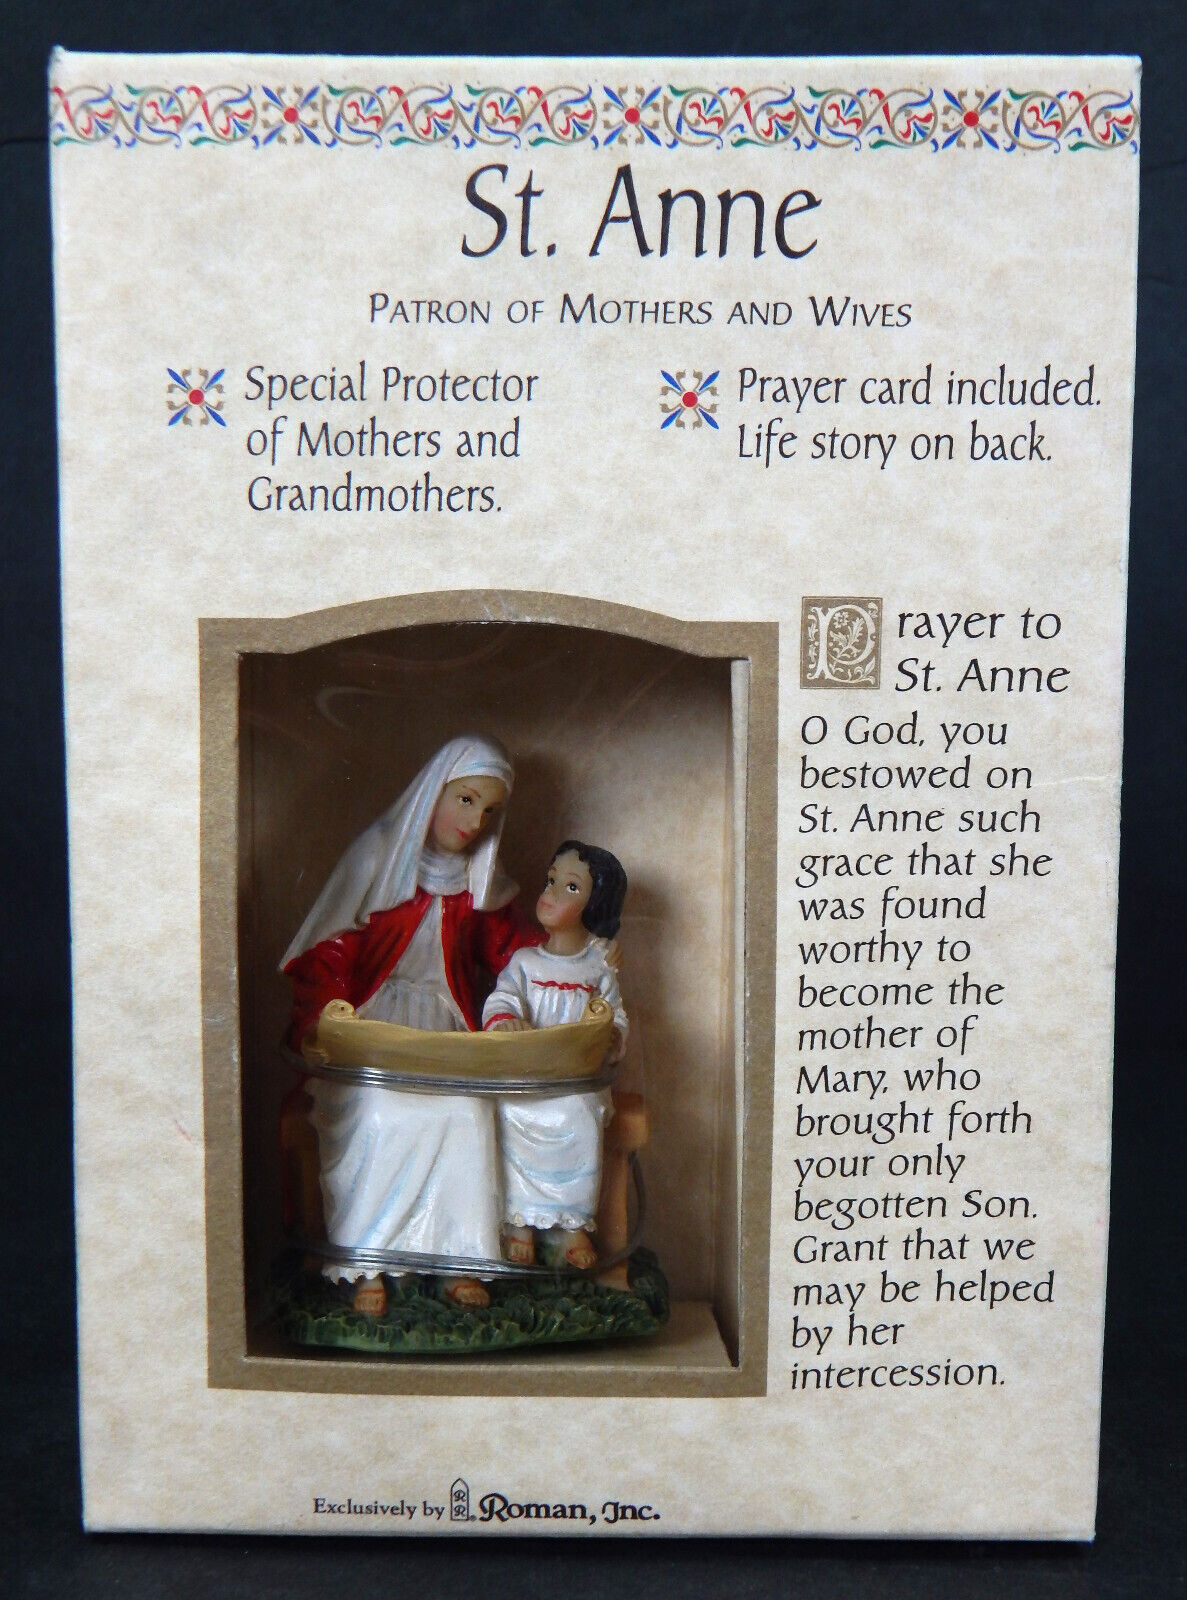 RARE 1998 ROMAN ST. ANNE PATRON OF MOTHERS & WIVES FIGURE STATUE & PRAYER CARD